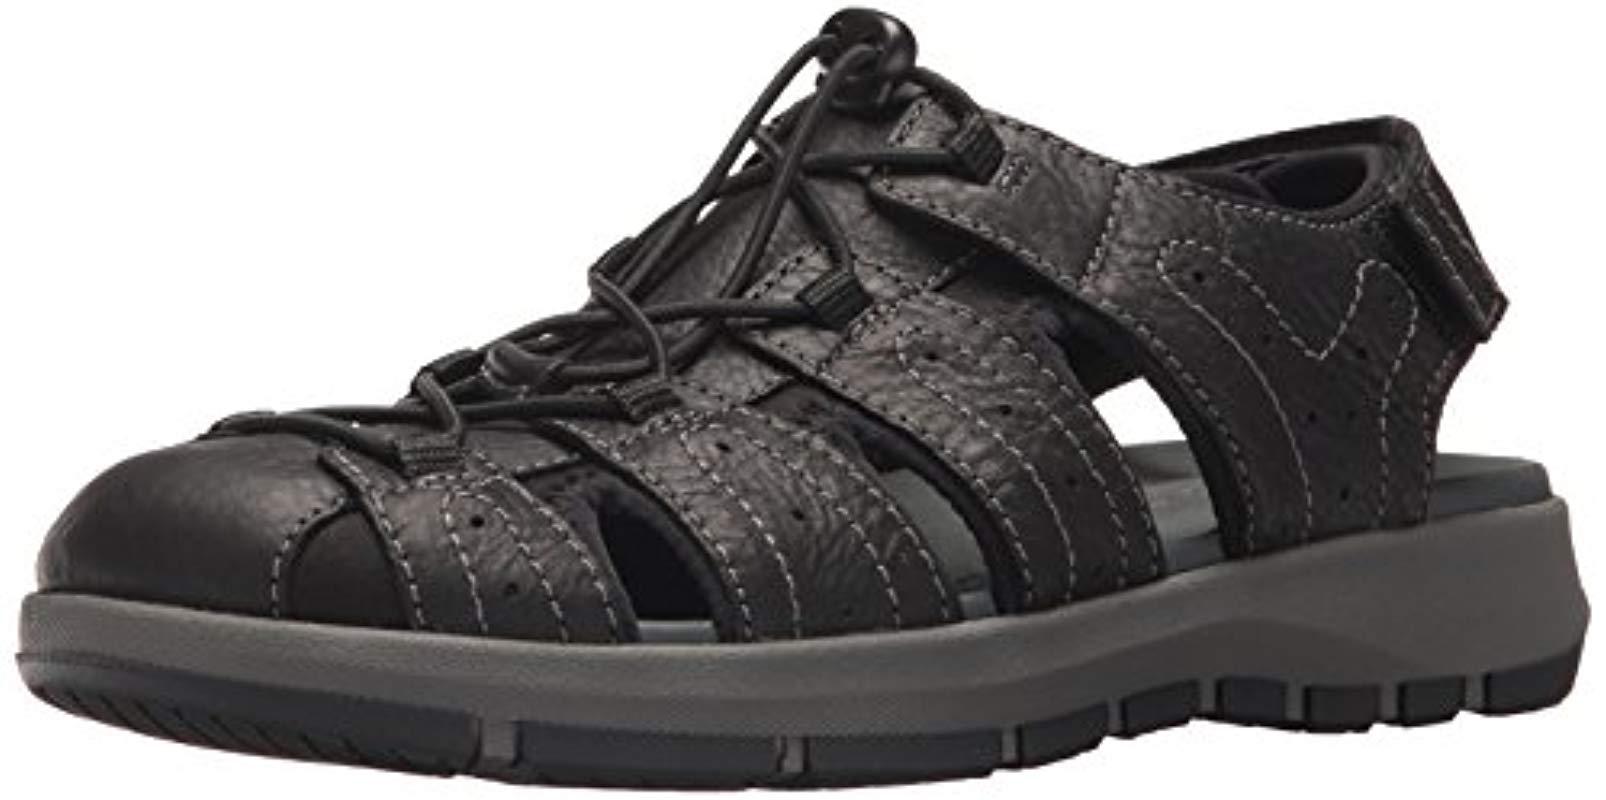 Clarks Leather Brixby Cove Fisherman Sandal in Black for Men - Save 63% ...